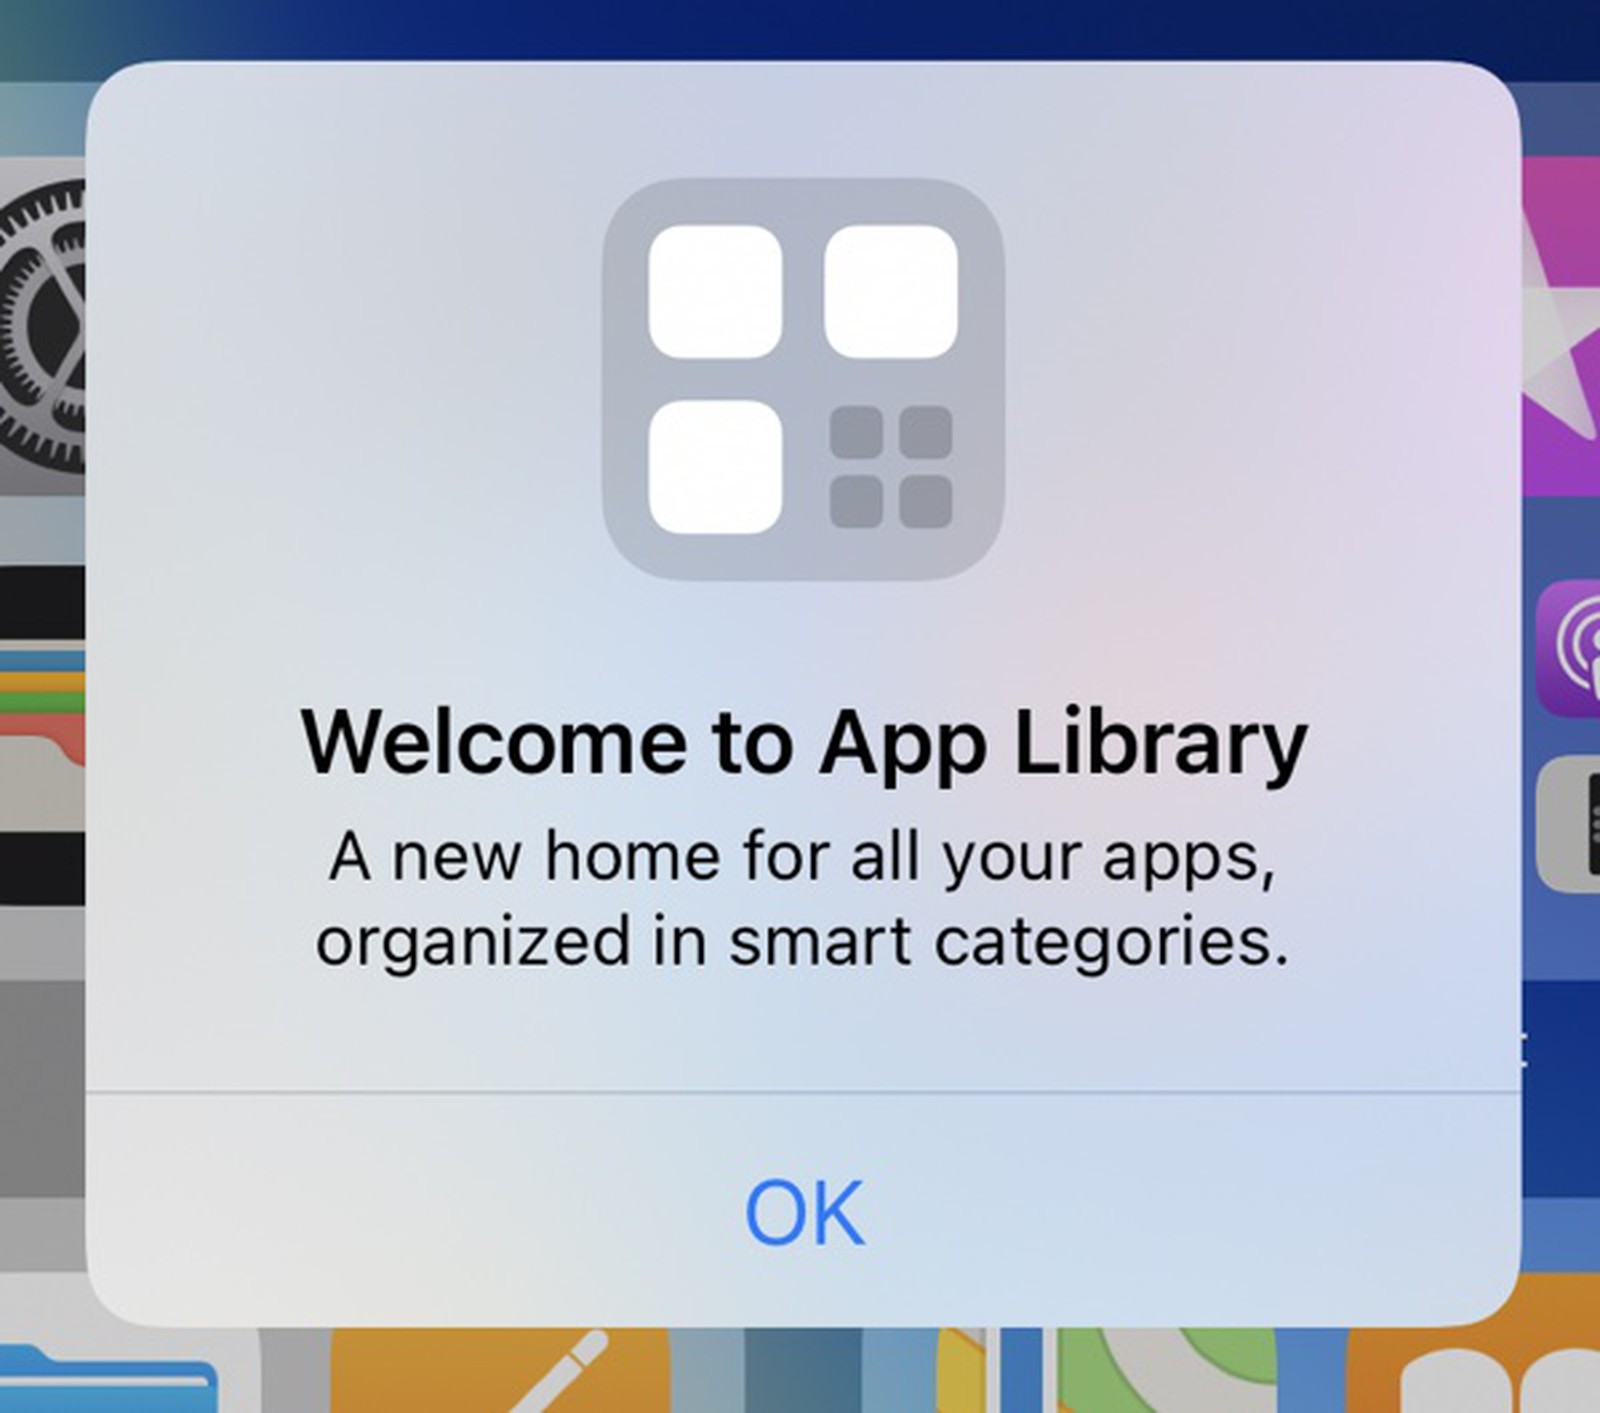 Welcome to App Library splash screen